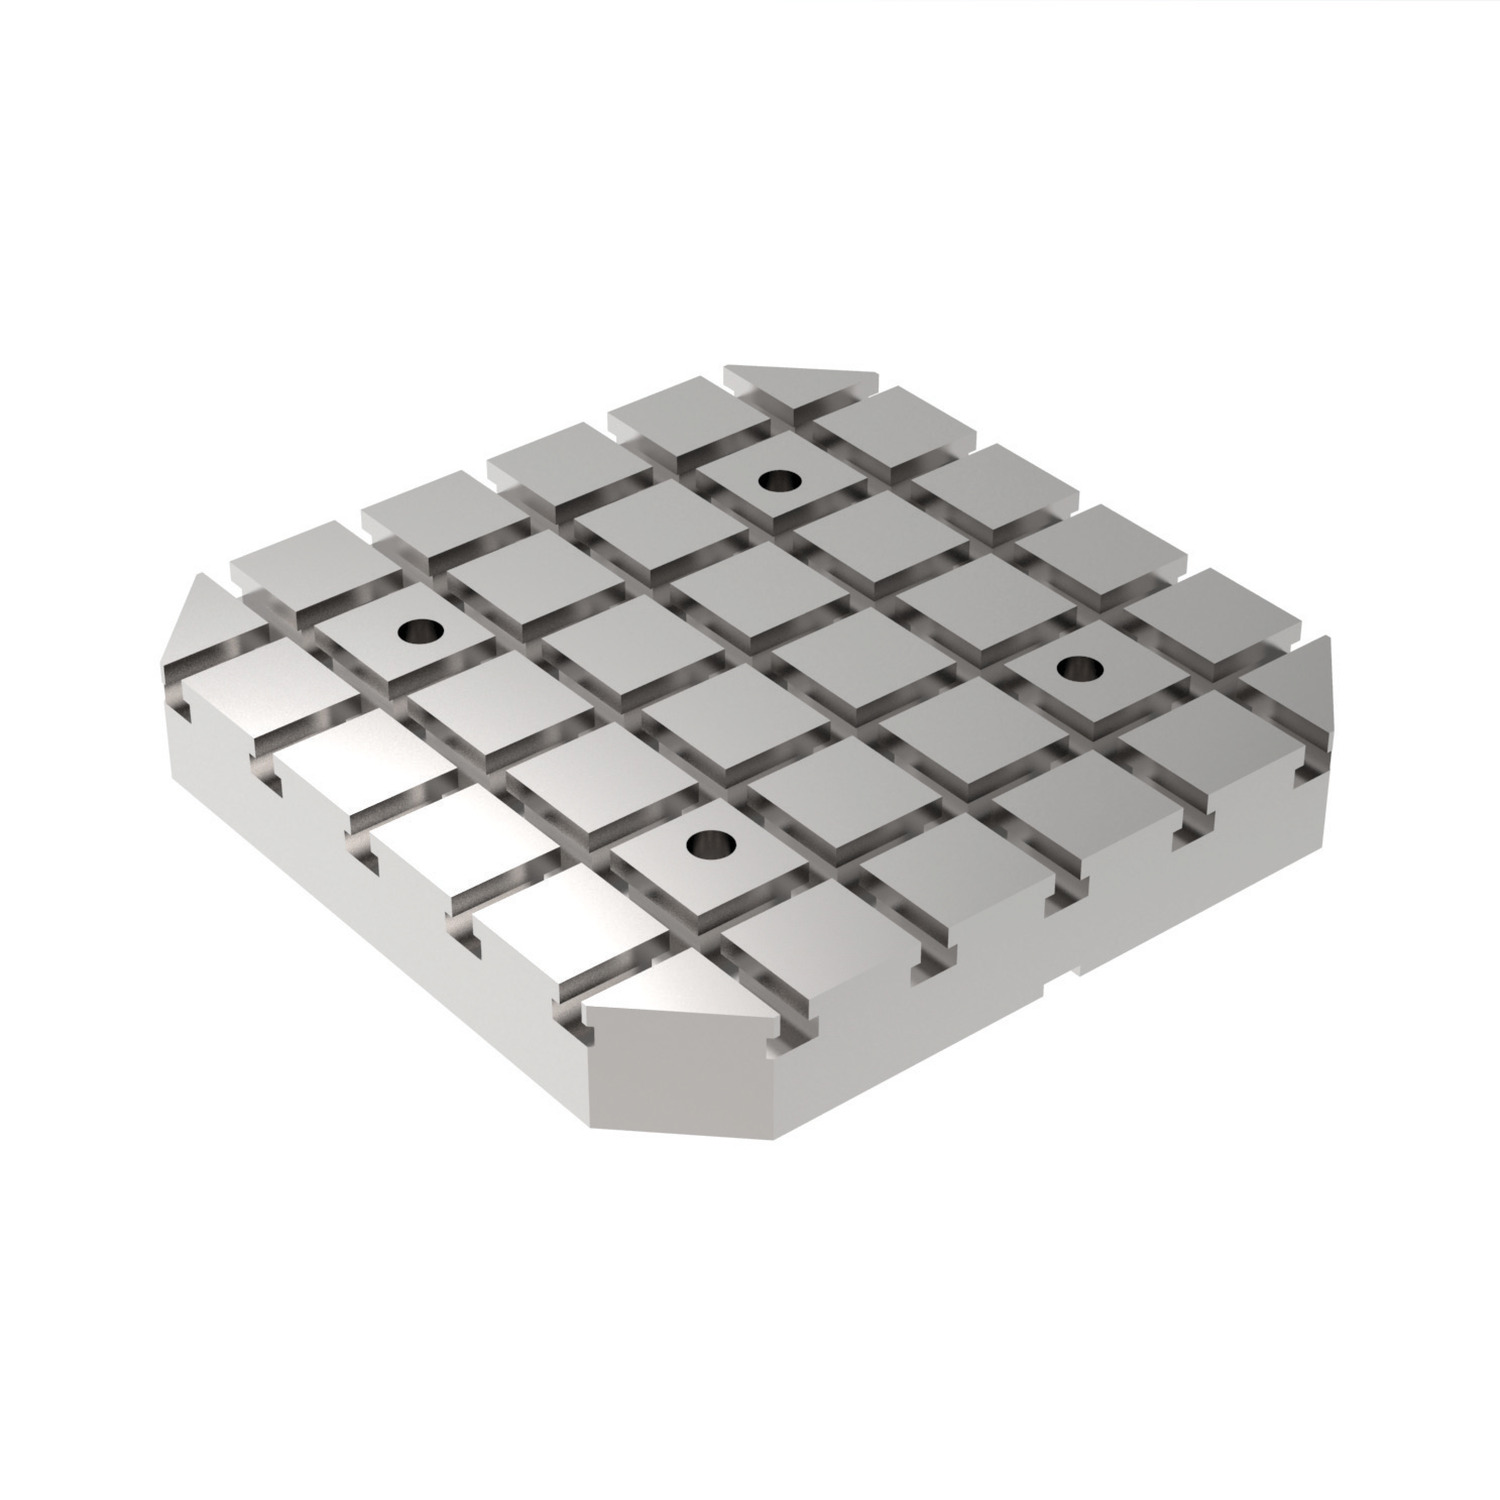 19582.W0700 Base plate - Tool steel. Price on application